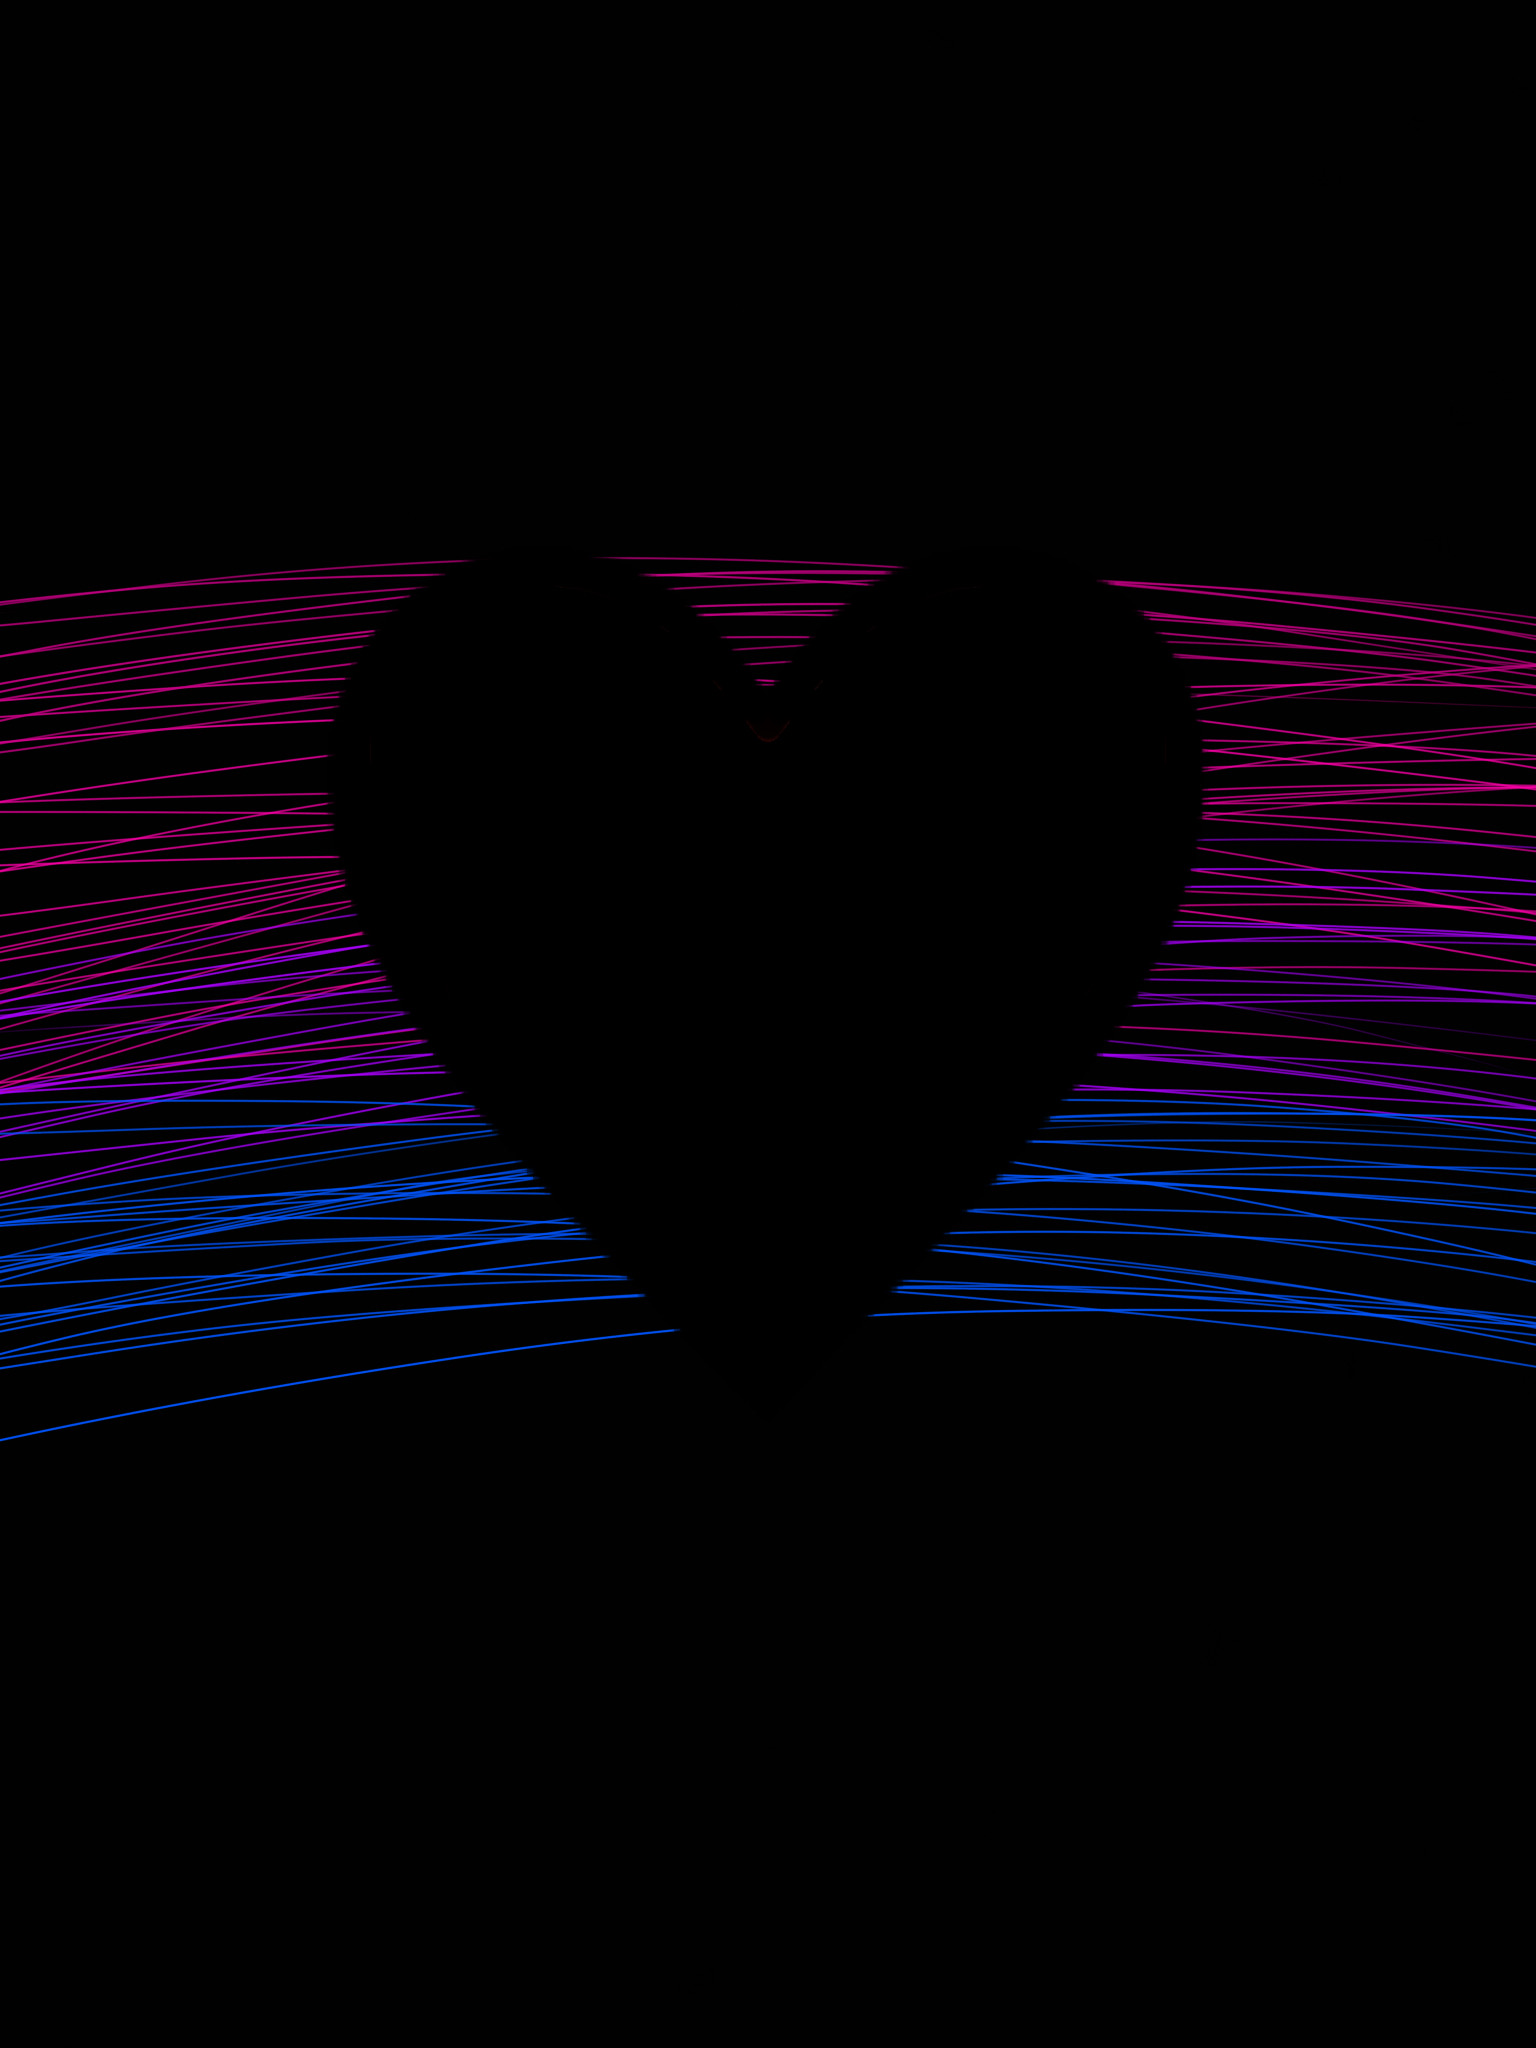 bisexual pride wallpaper by robynthefrog on DeviantArt